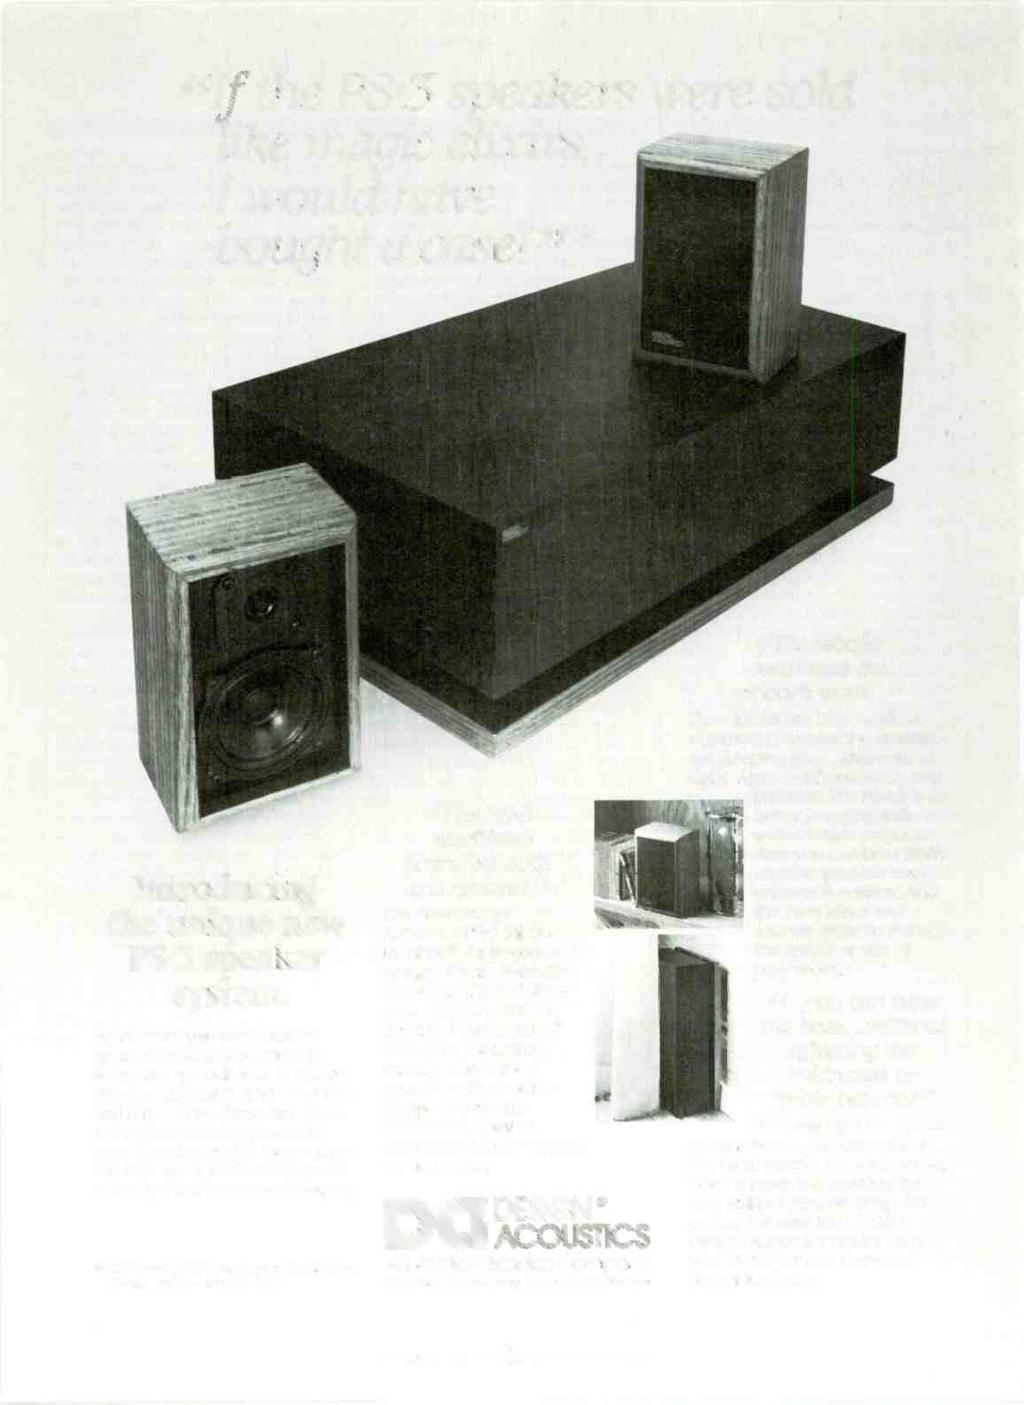 "If the PS3 speakers were sold like magic elixirs, I would have bought a case!"" Introducing the unique new PS3 speaker system.